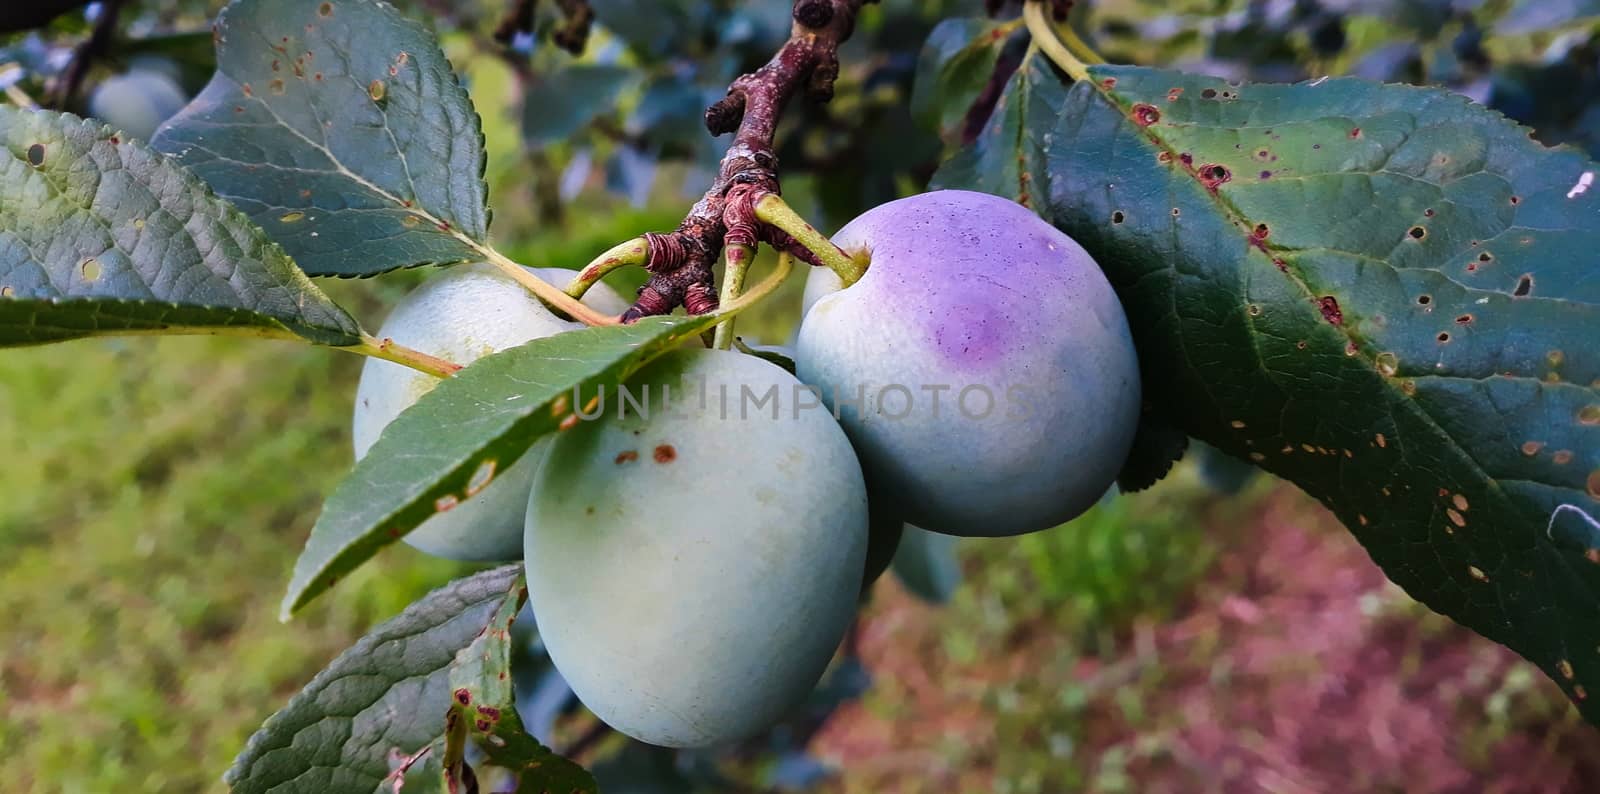 Green plums on the branch on which begins to appear blue. Zavidovici, Bosnia and Herzegovina.